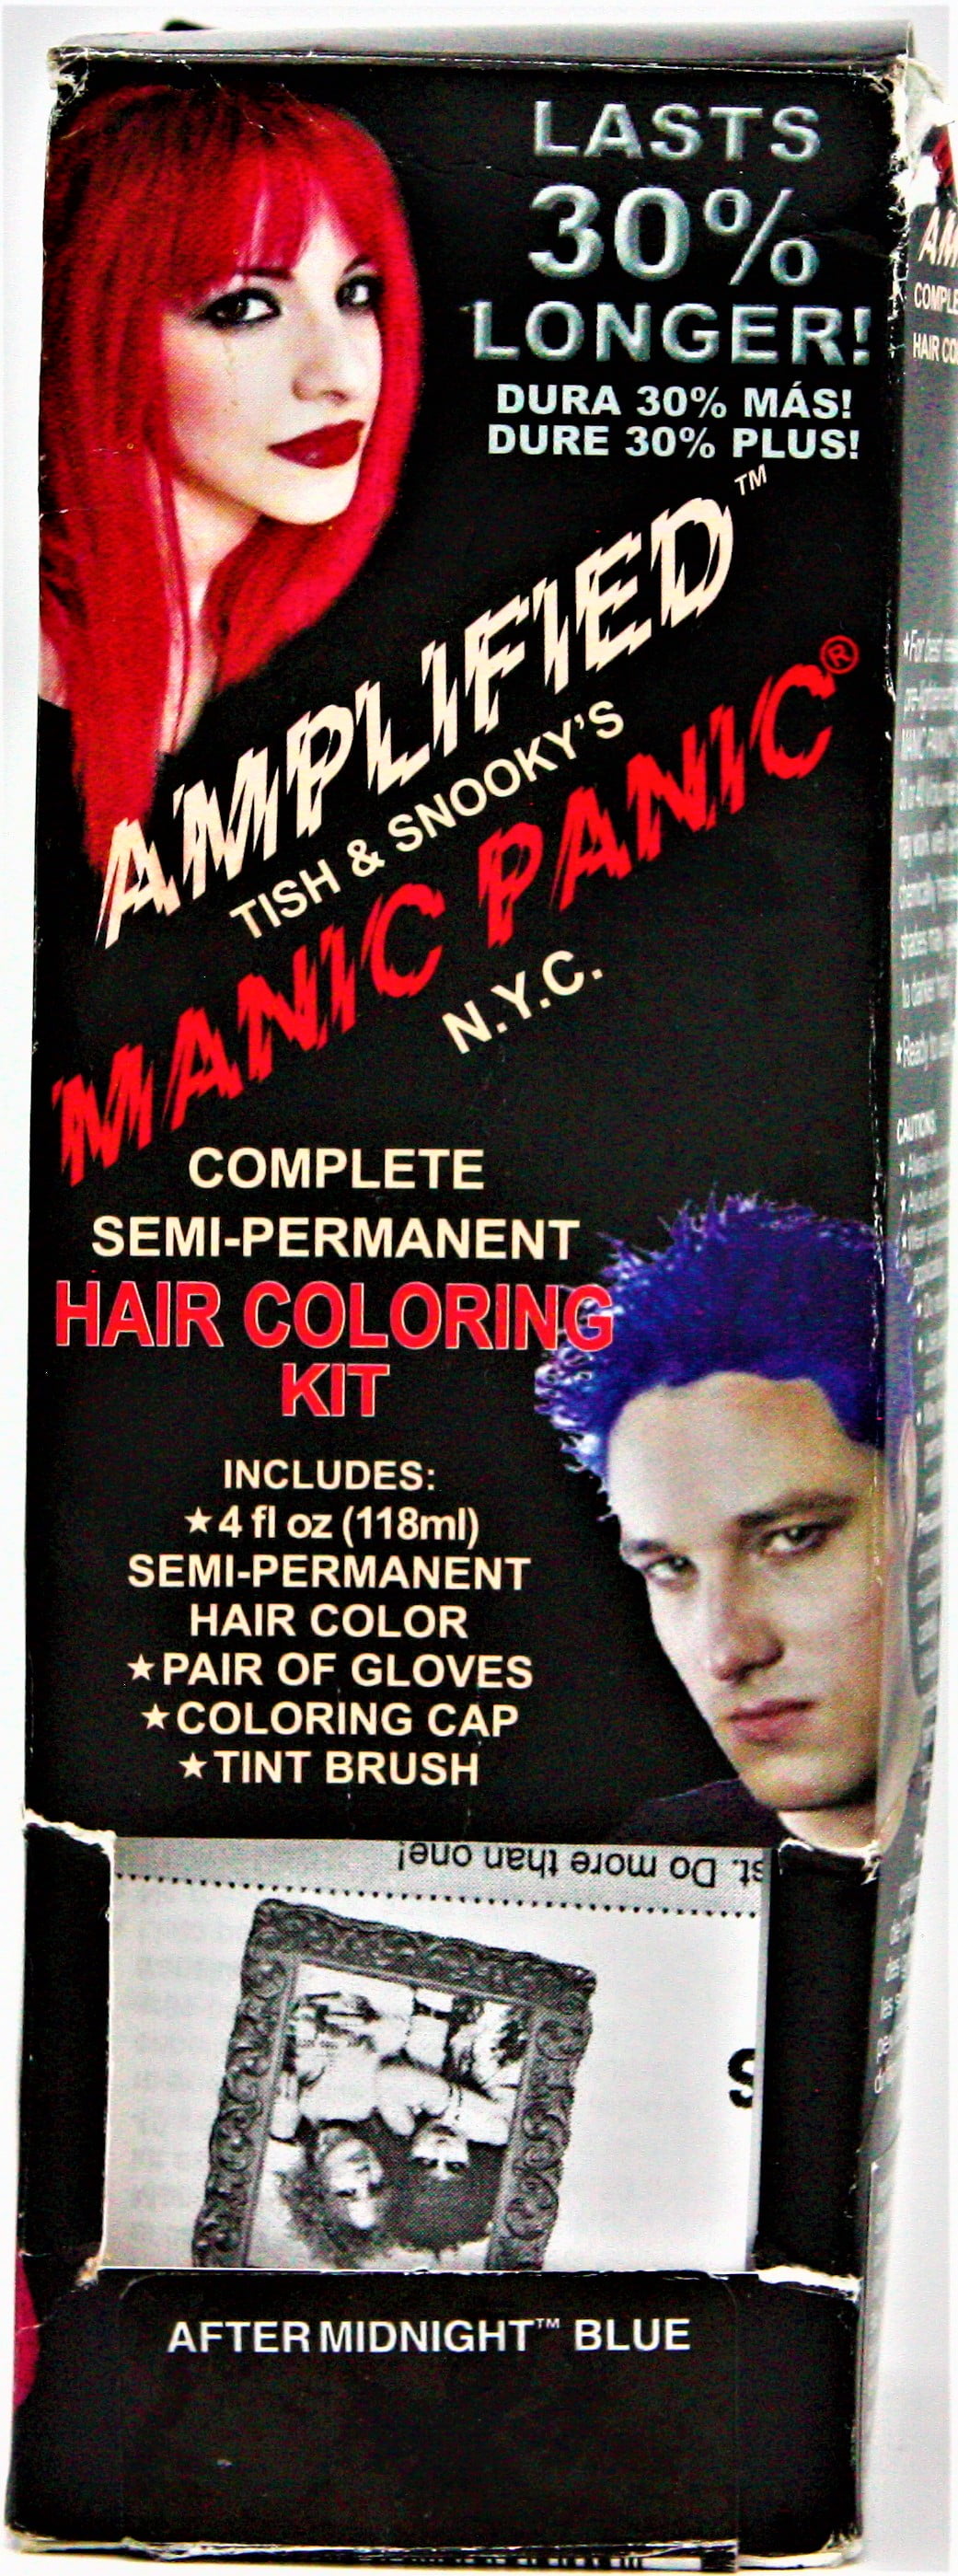 Amplified Tish Snooky S Manic Panic Nyc Complete Semi Permanent Hair Coloring Kit After Midnight Blue Walmart Com Walmart Com